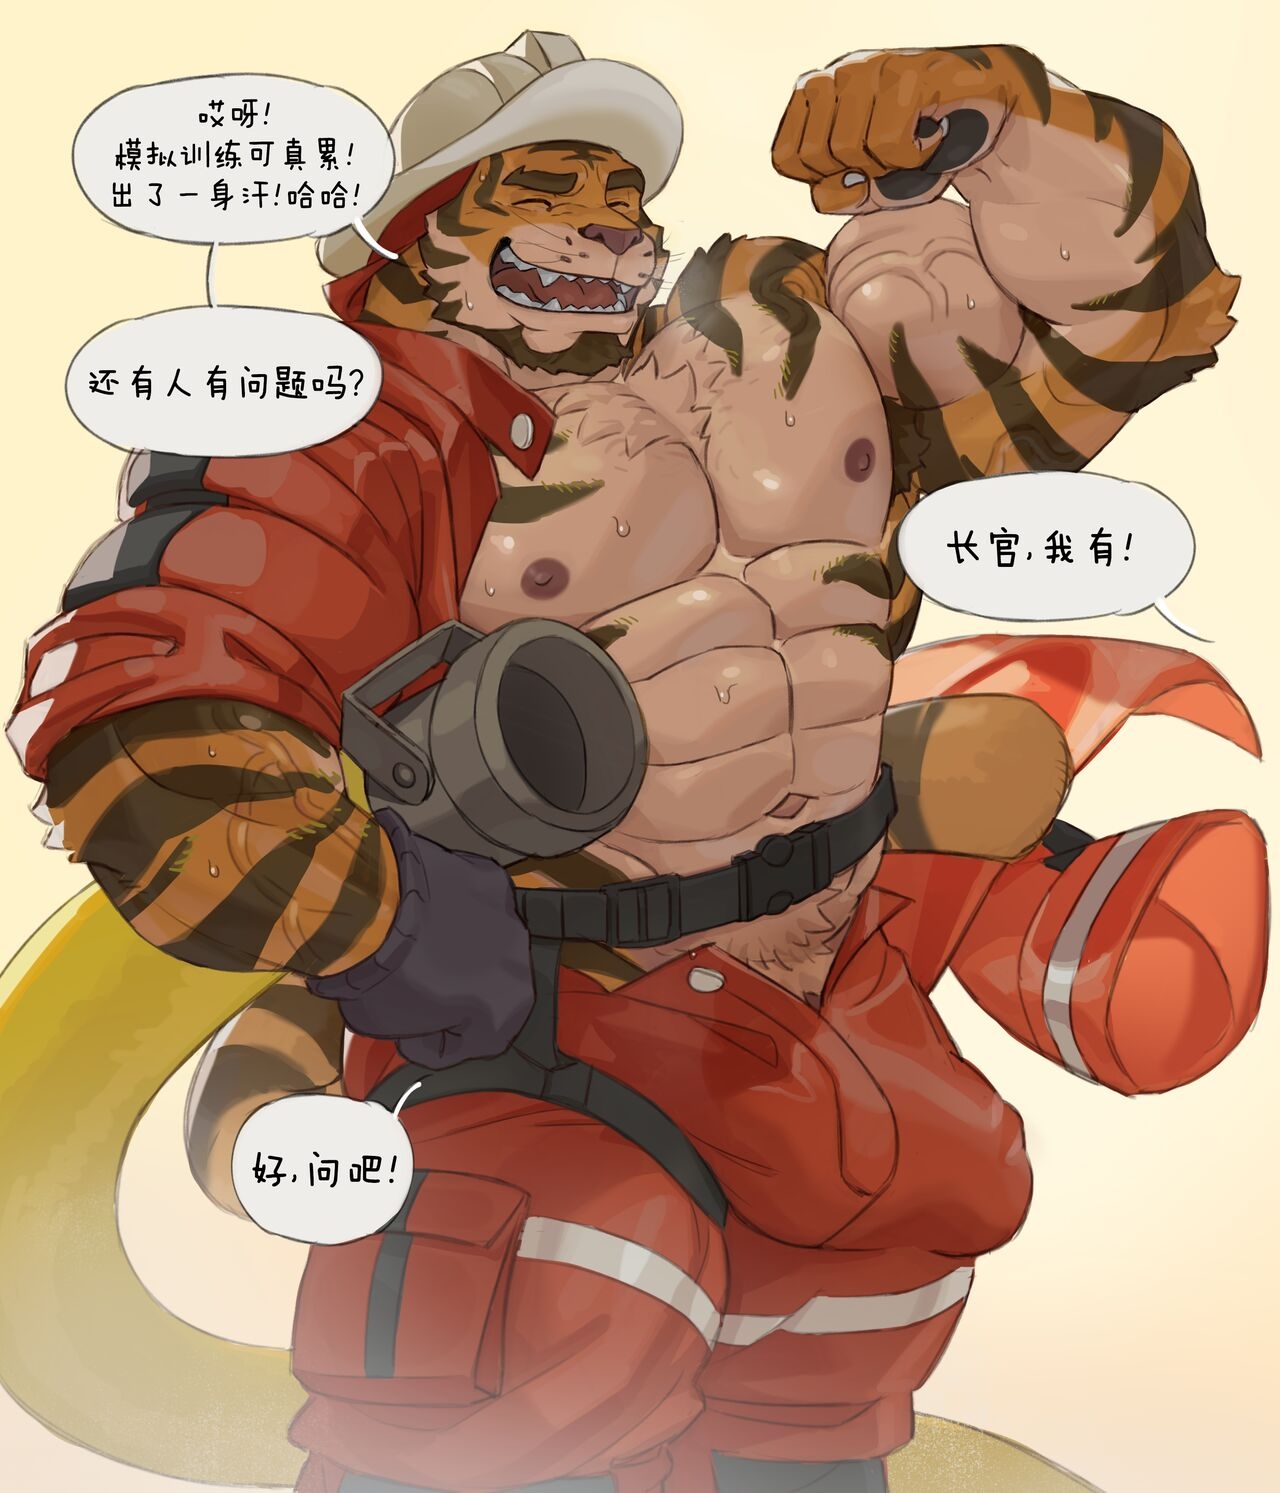 [Imatoart] Tiger Fire Chief's Training Session | 老虎消防队长的训练时间! [Chinese][Translated by Chrome Heart Tags] 1